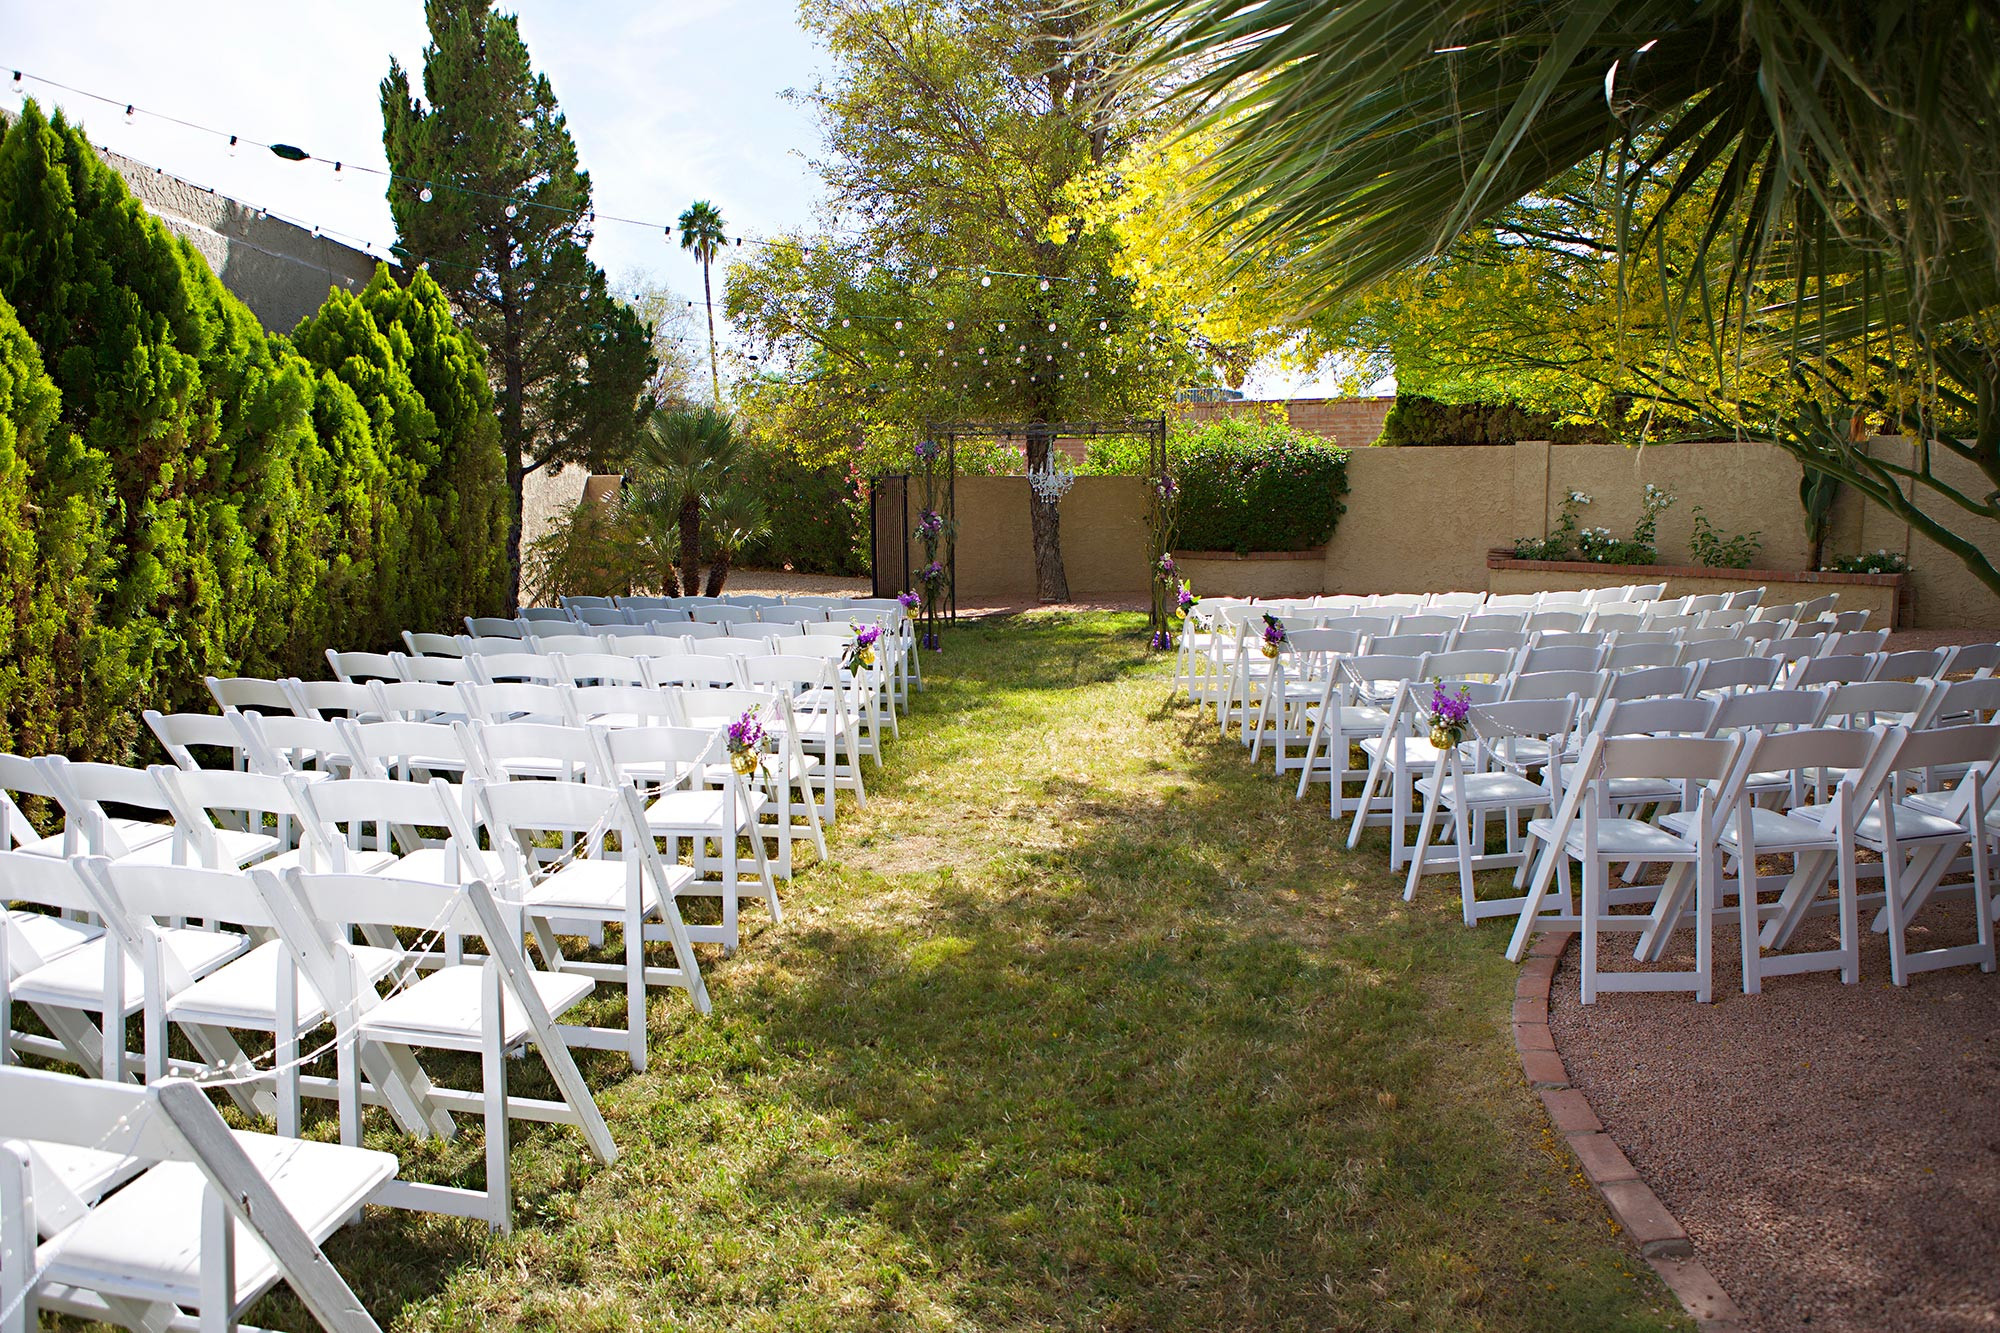 Inexpensive Outdoor Wedding Venues
 Top 25 Cheap Wedding Venue Ideas for Ceremony on a Bud